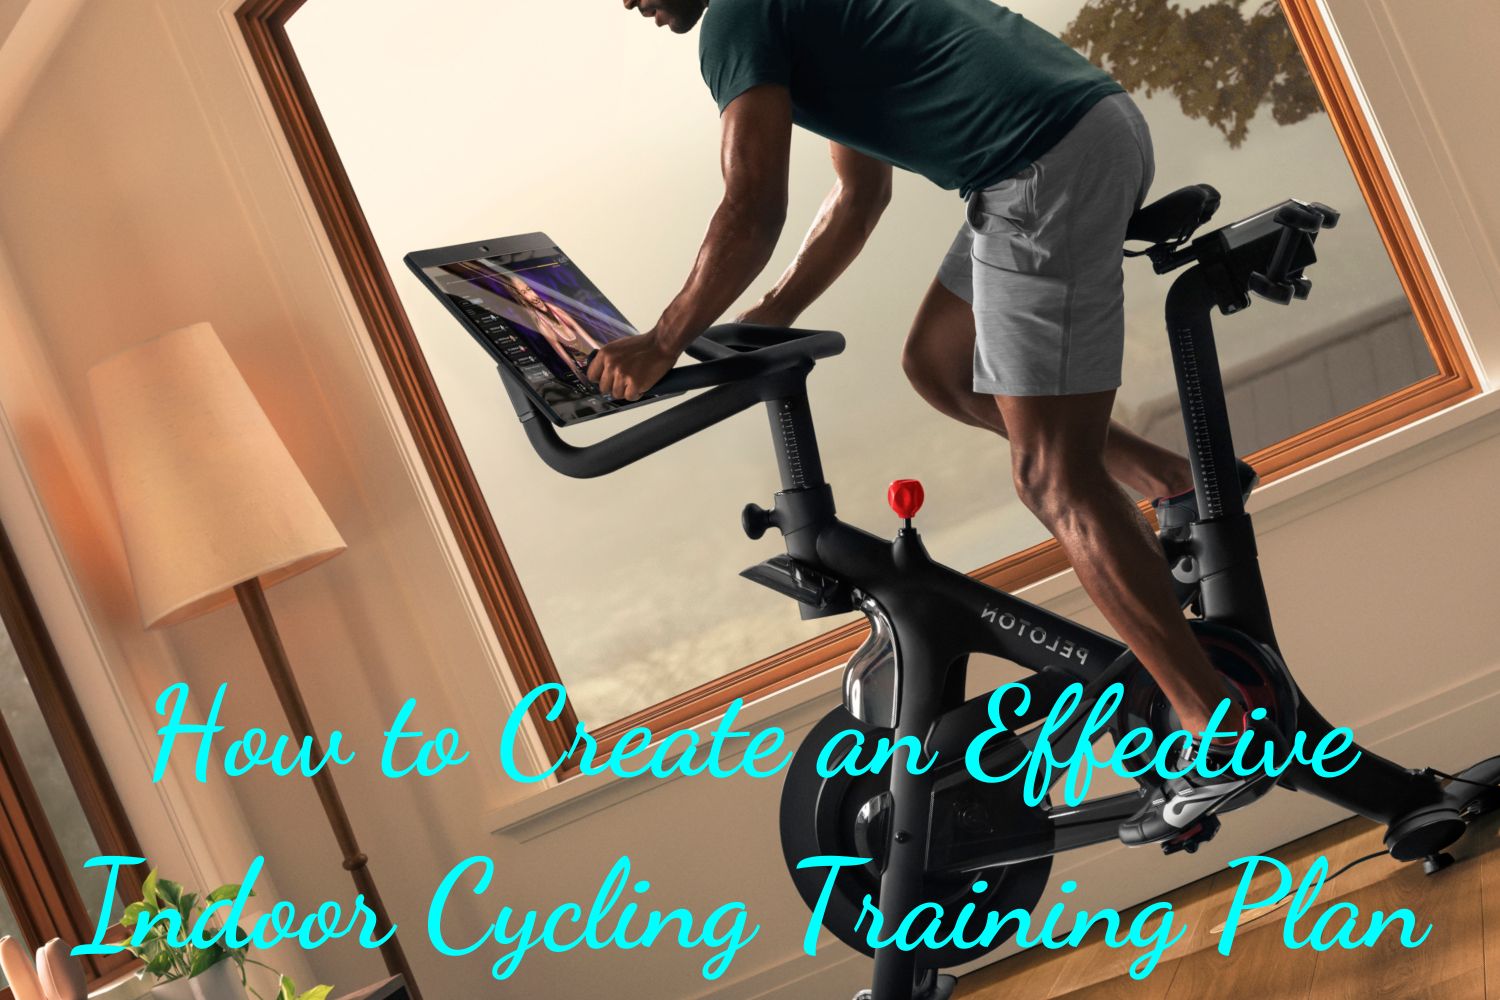 How to Create an Effective Indoor Cycling Training Plan